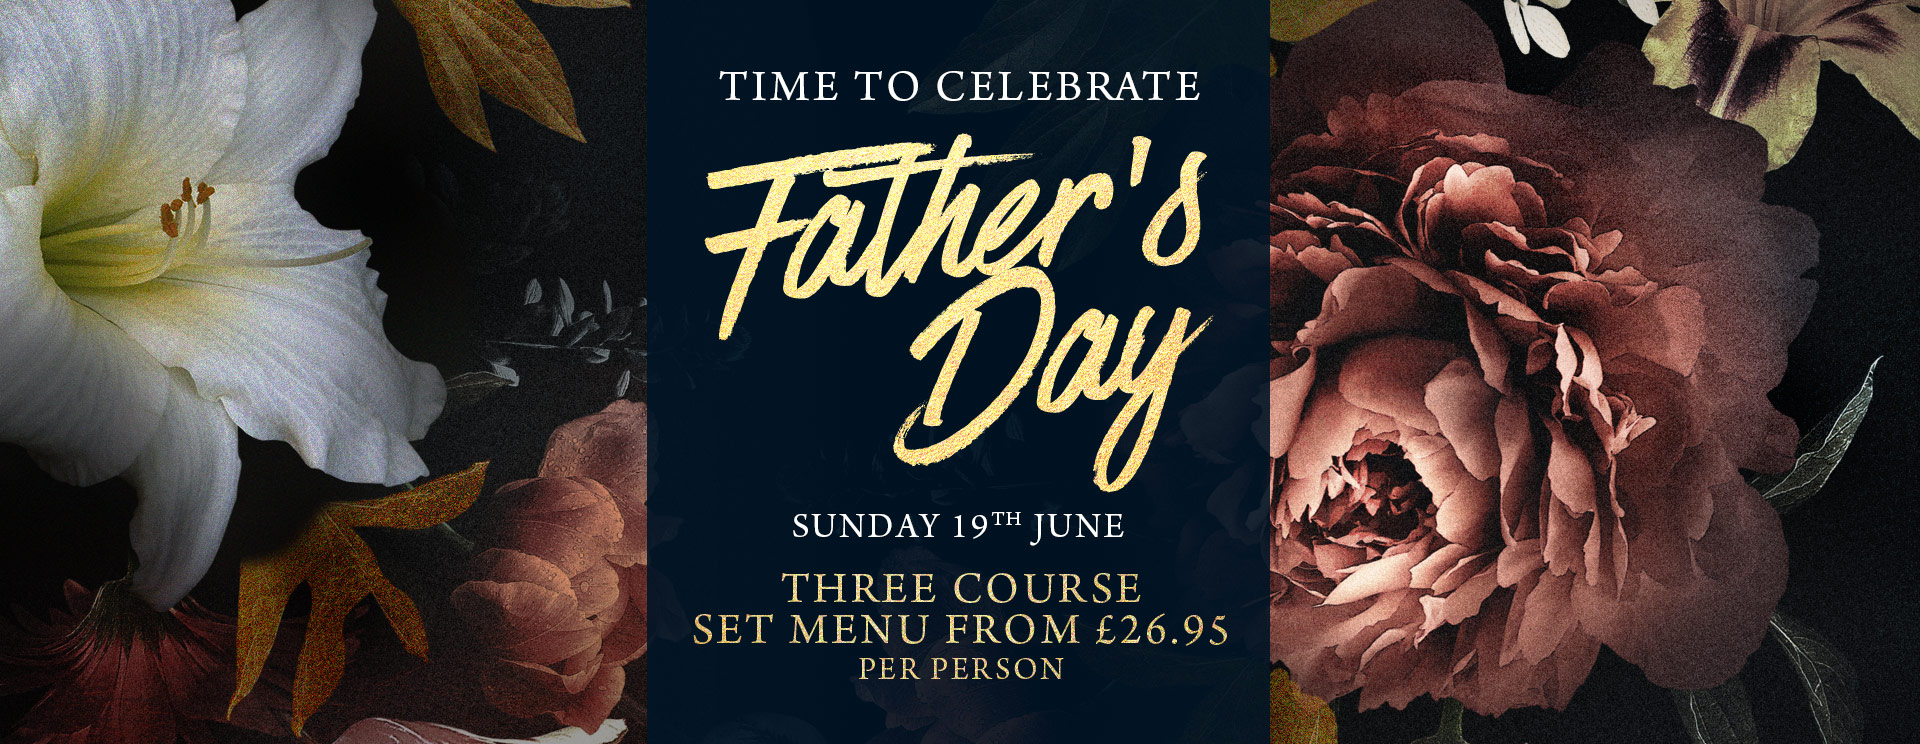 Fathers Day at The Bulls Head